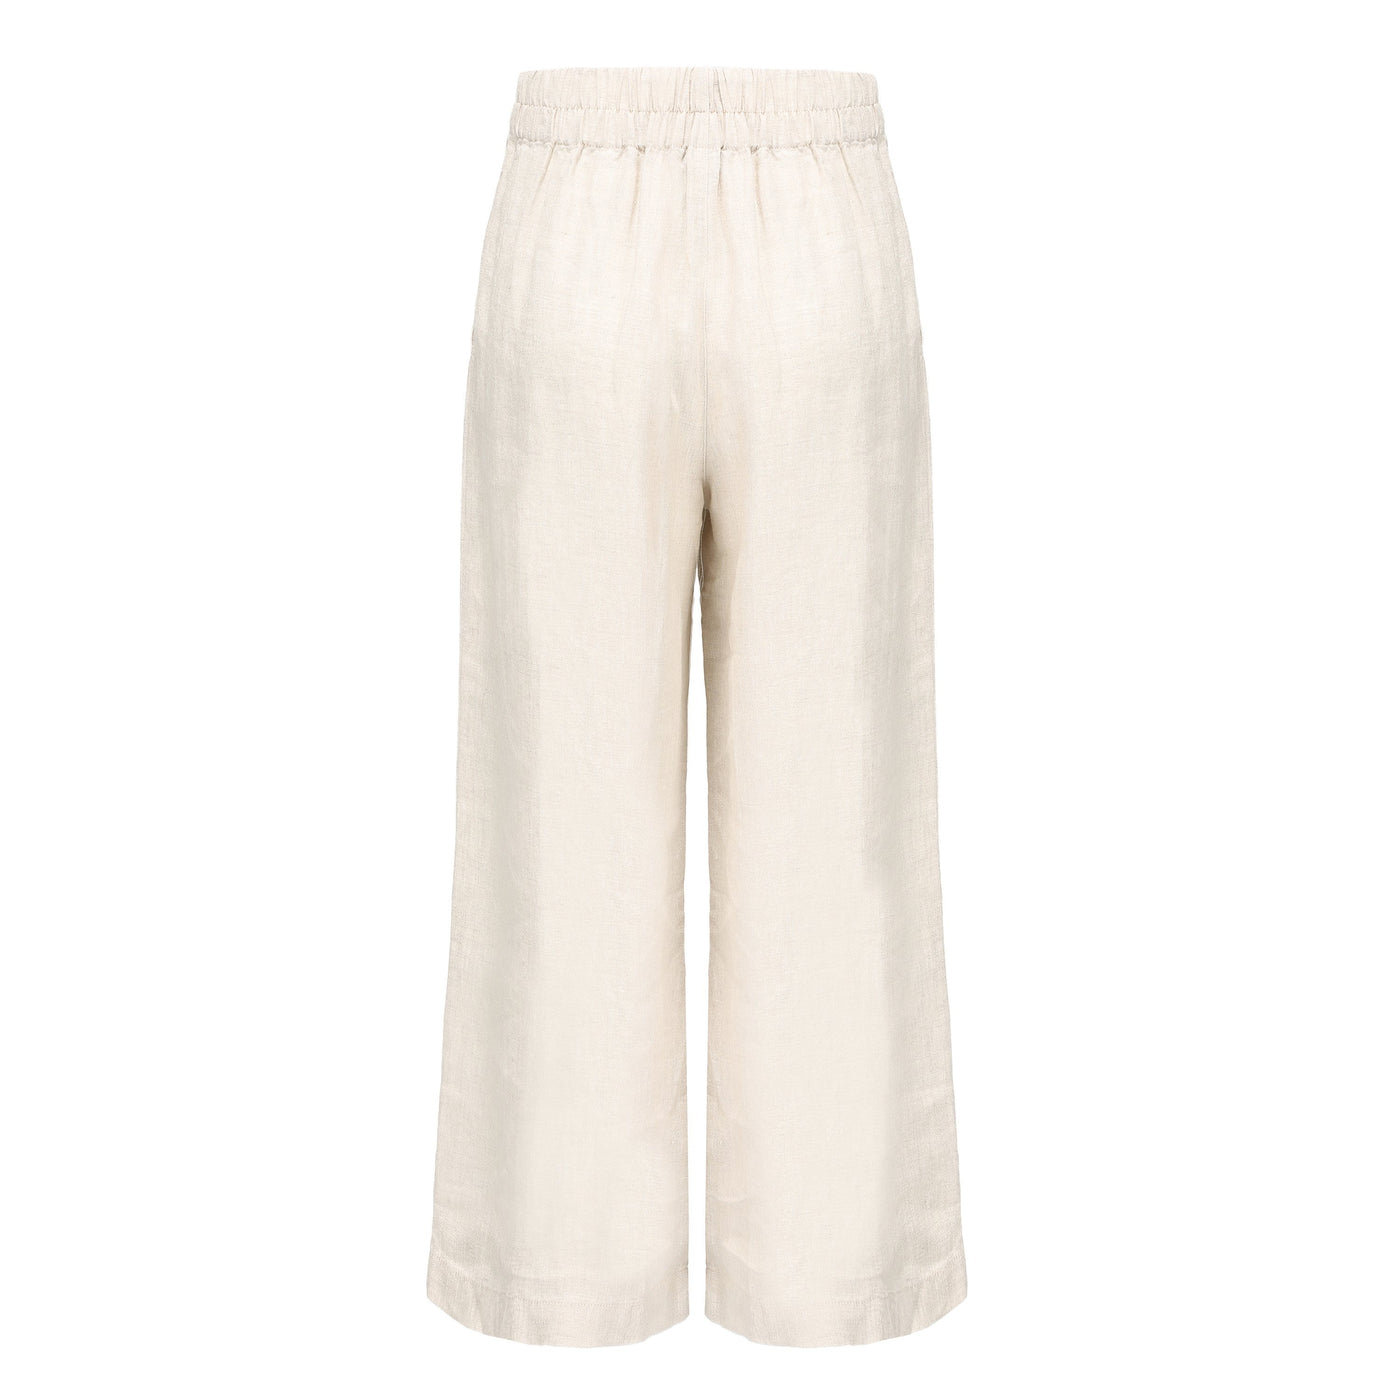 LILLY PILLY Collection 100% organic linen Ava Pants in Oatmeal as 3D image showing back view